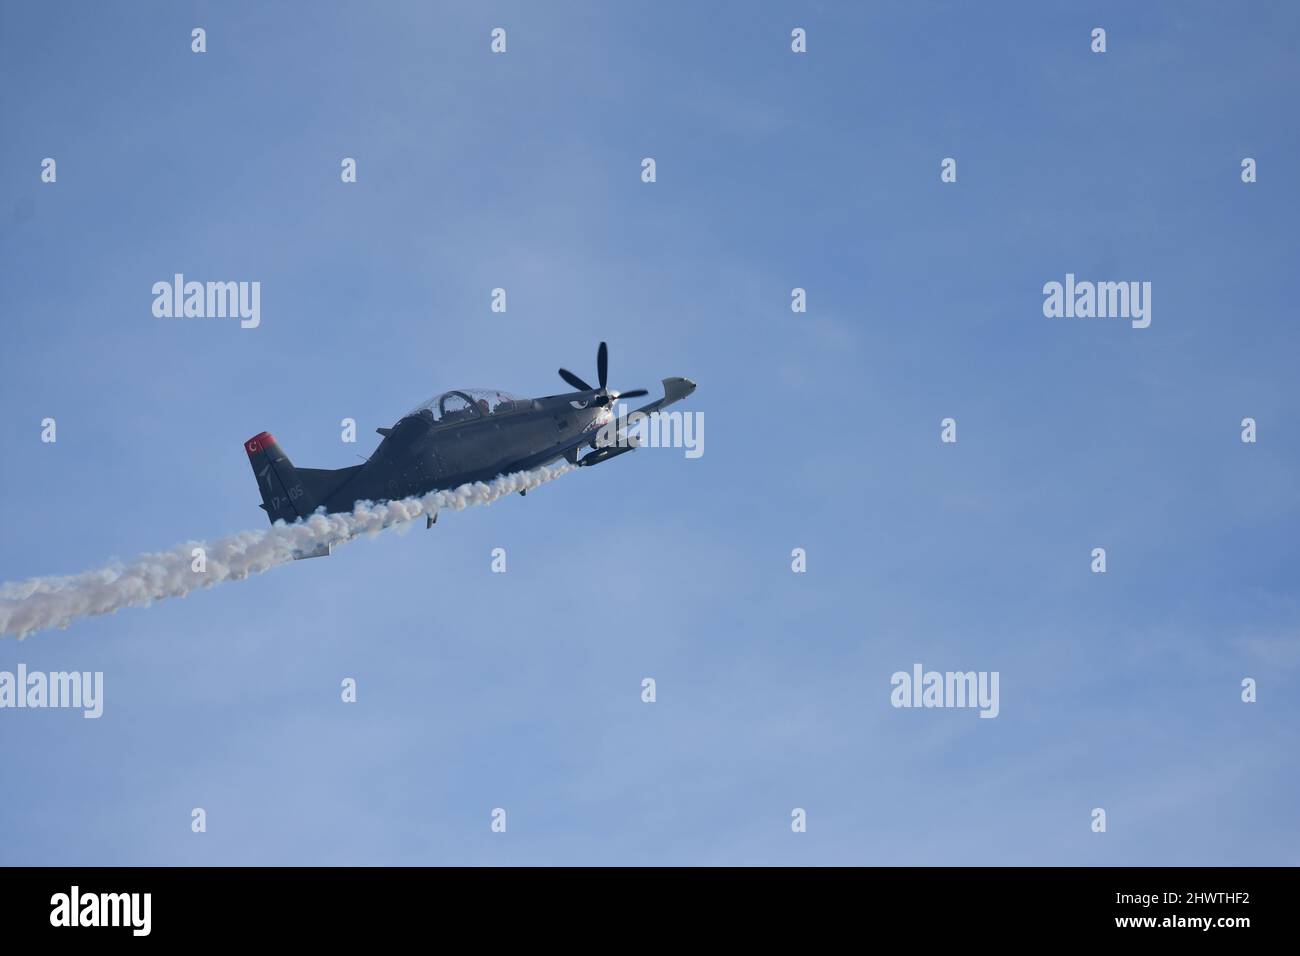 Single-engine, turboprop aircraft at airshow Stock Photo